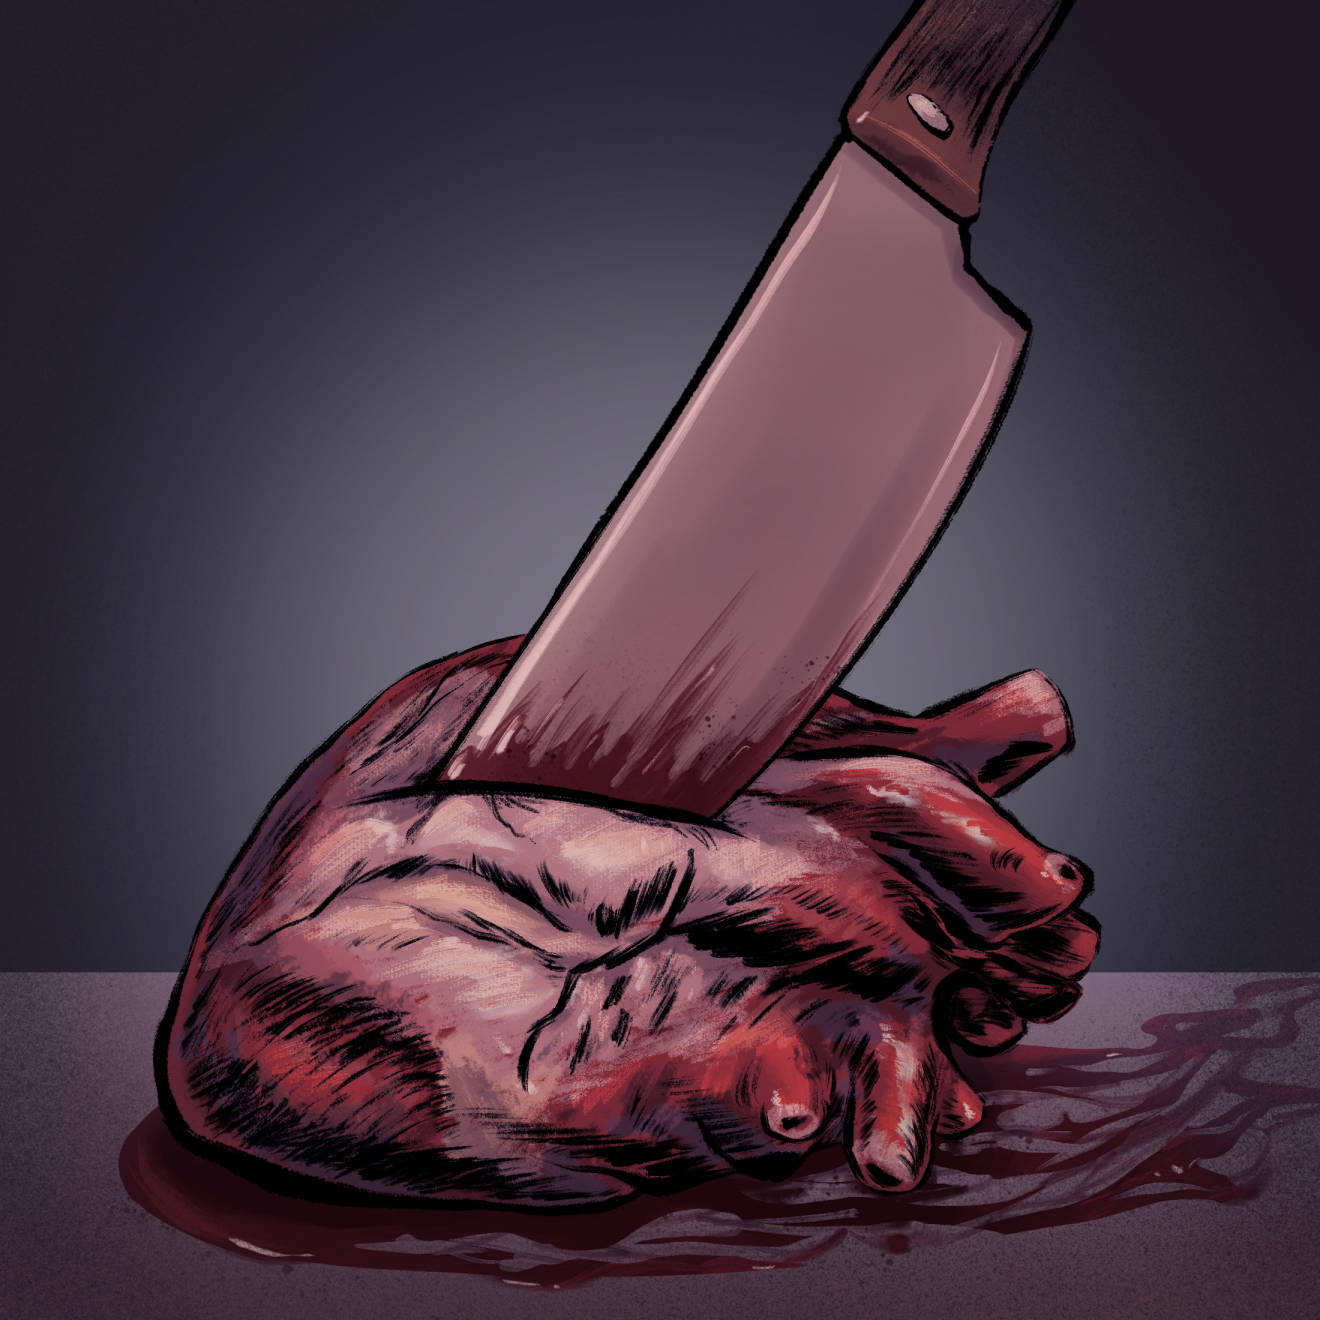 A drawing of a realistic human heart stabbed by a knife